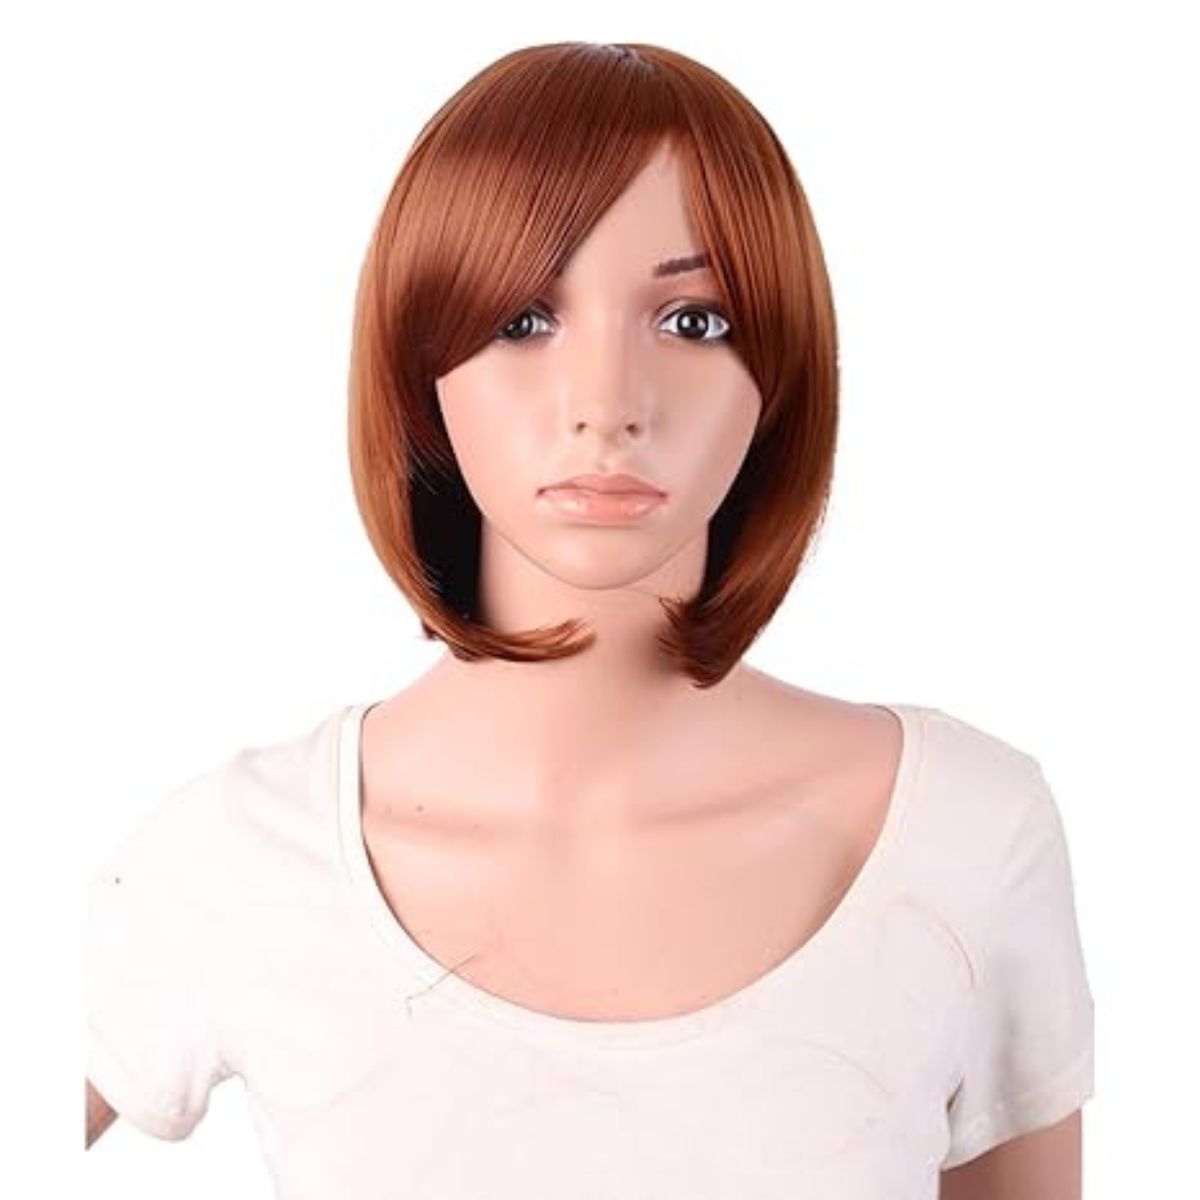 12 Inches Short Hair Wig